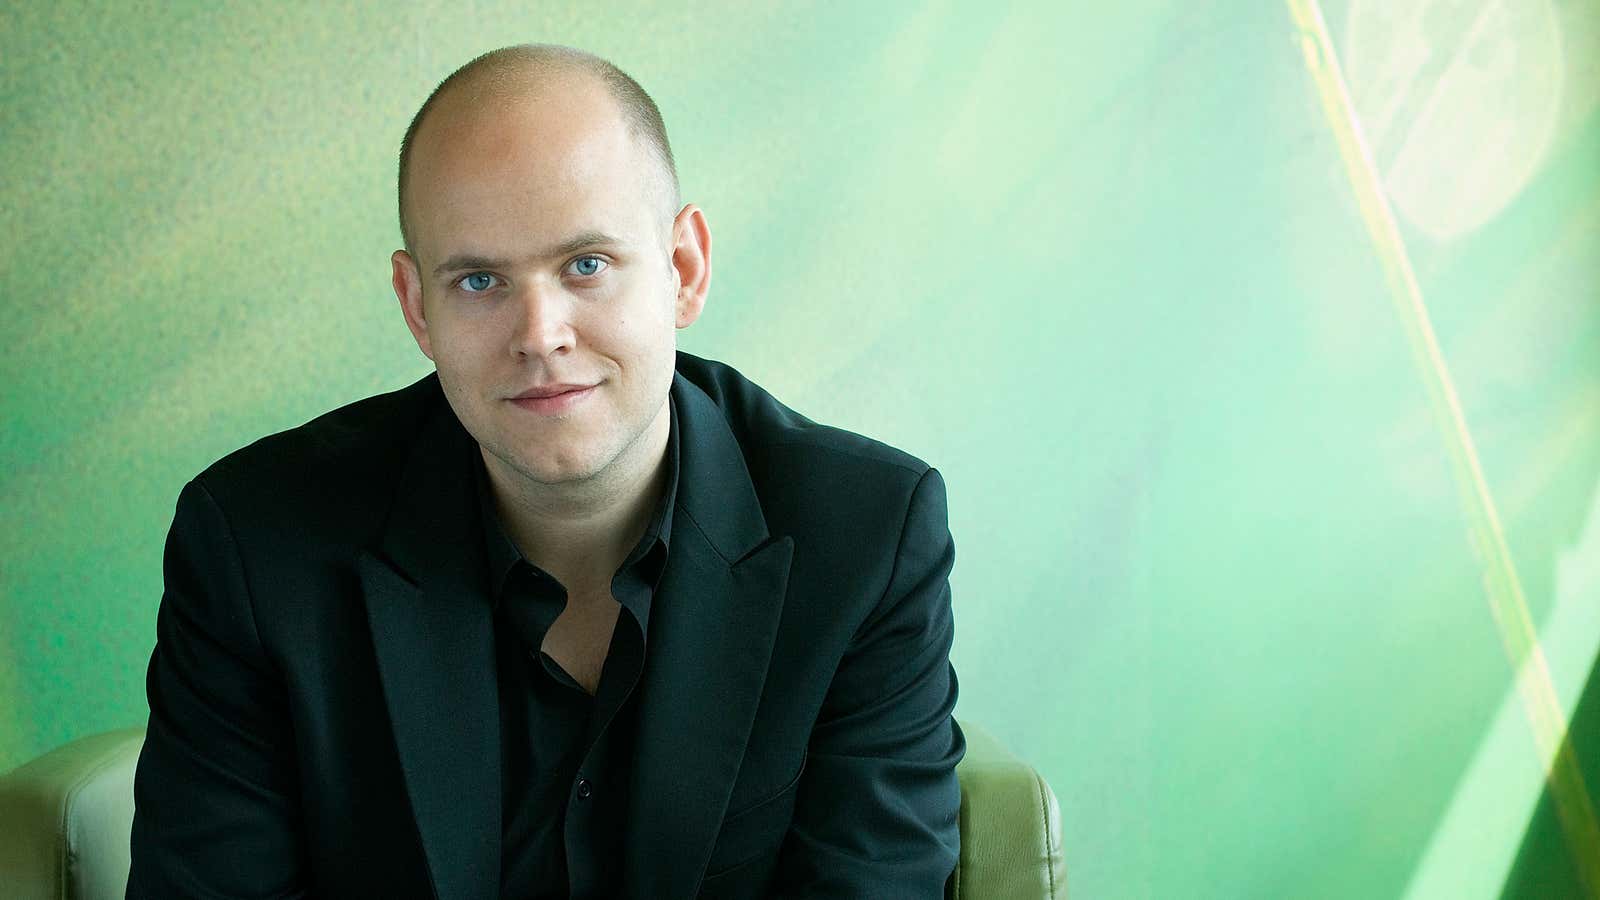 Daniel Ek, founder of Spotify, says he wants to be the Jeff Bezos of music.